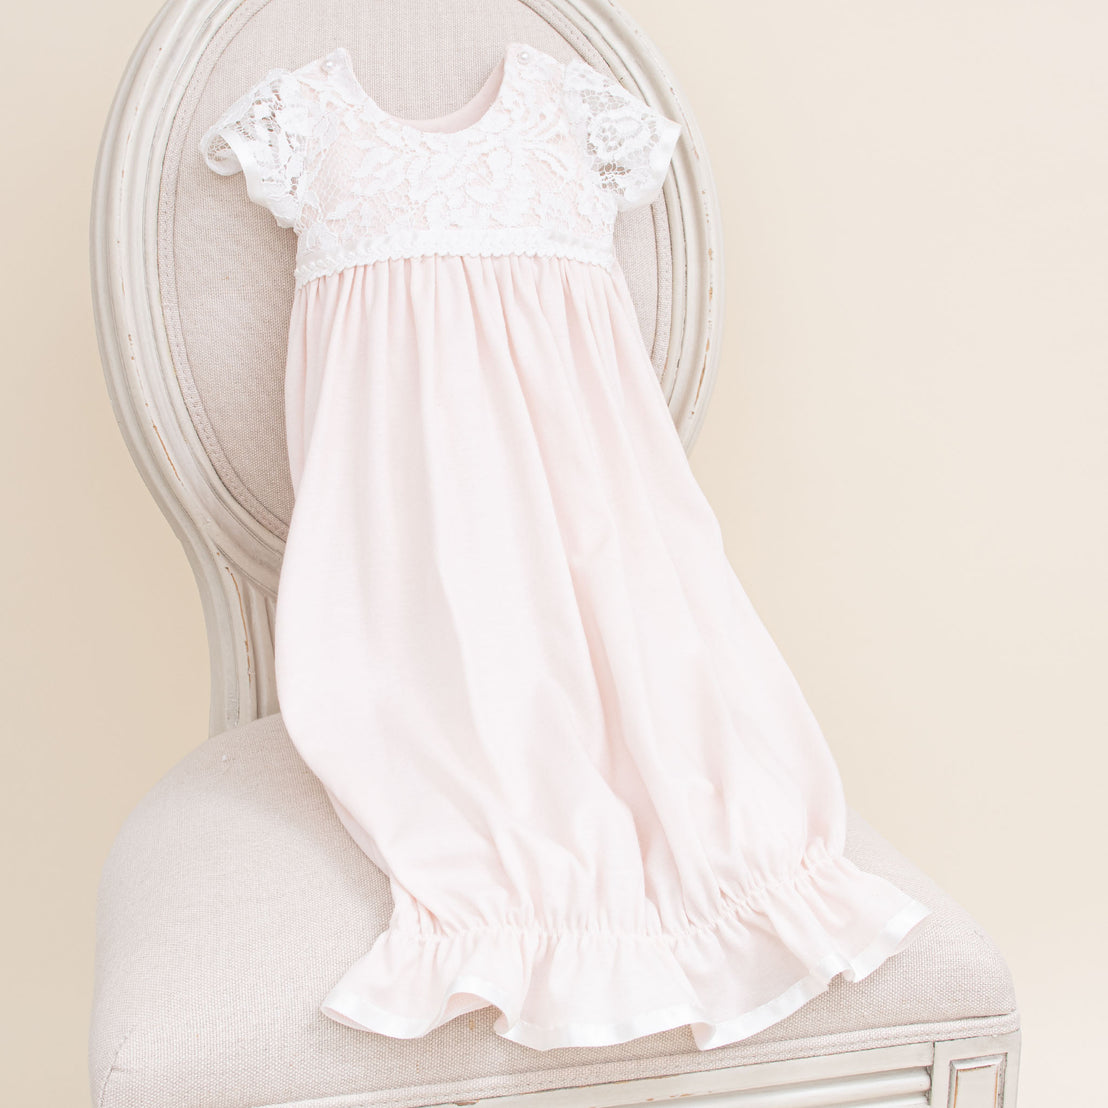 A delicate Rose Newborn Layette displayed on an upscale vintage chair with ornate details.